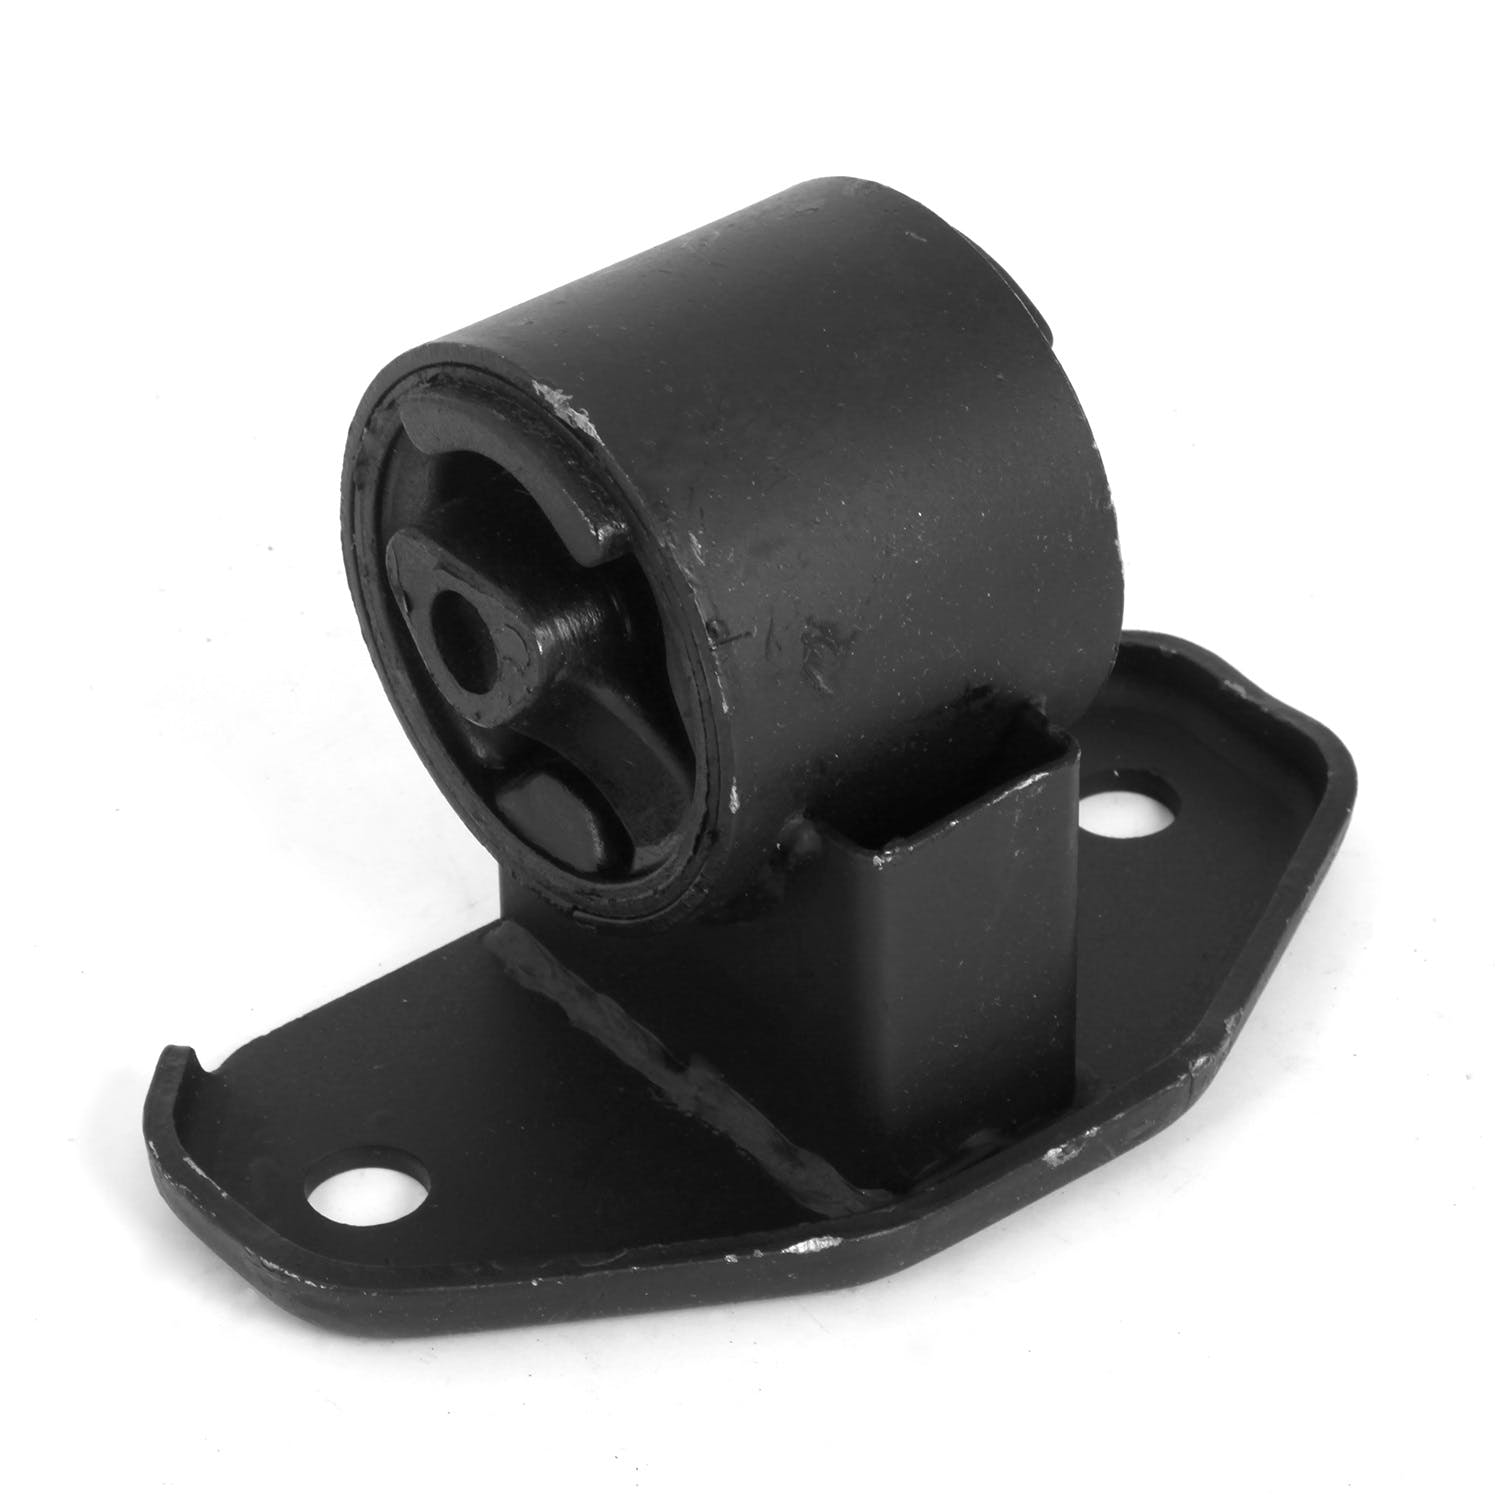 Omix-ADA 19005.16 Replacement Transmission Mount